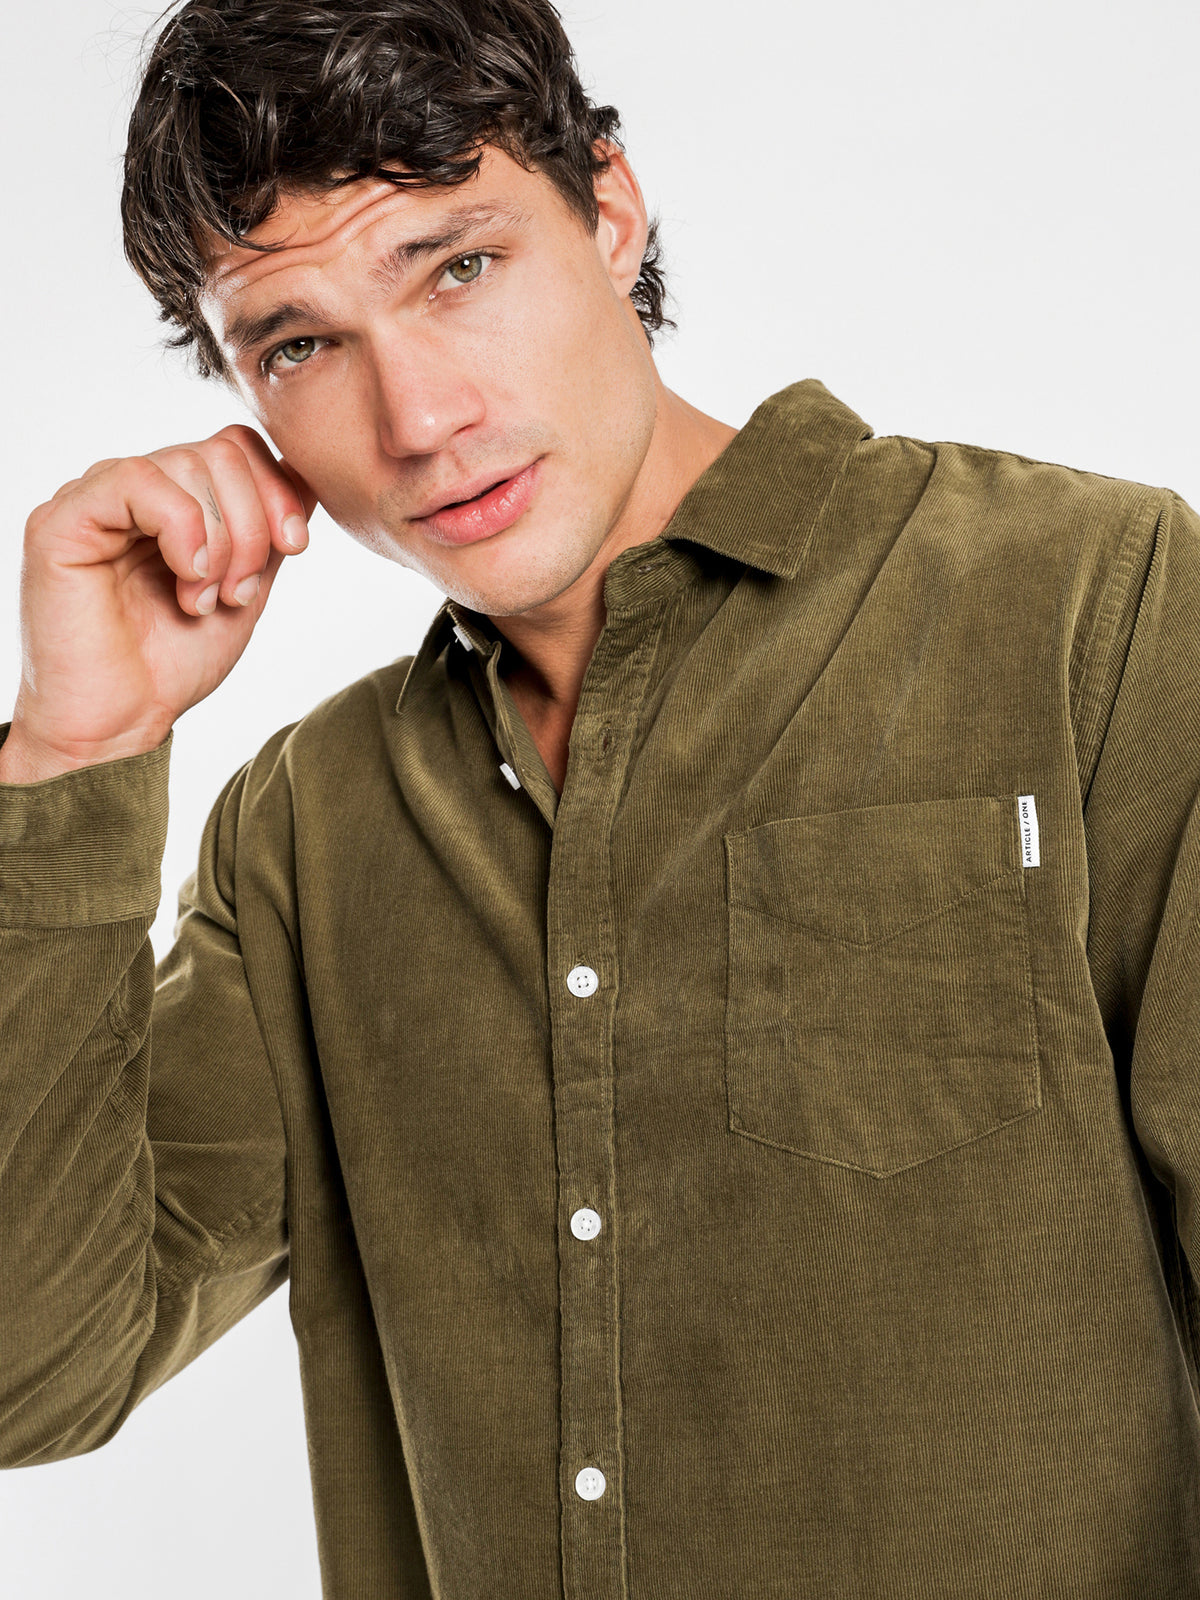 Axel Cord Long Sleeve Shirt in Olive